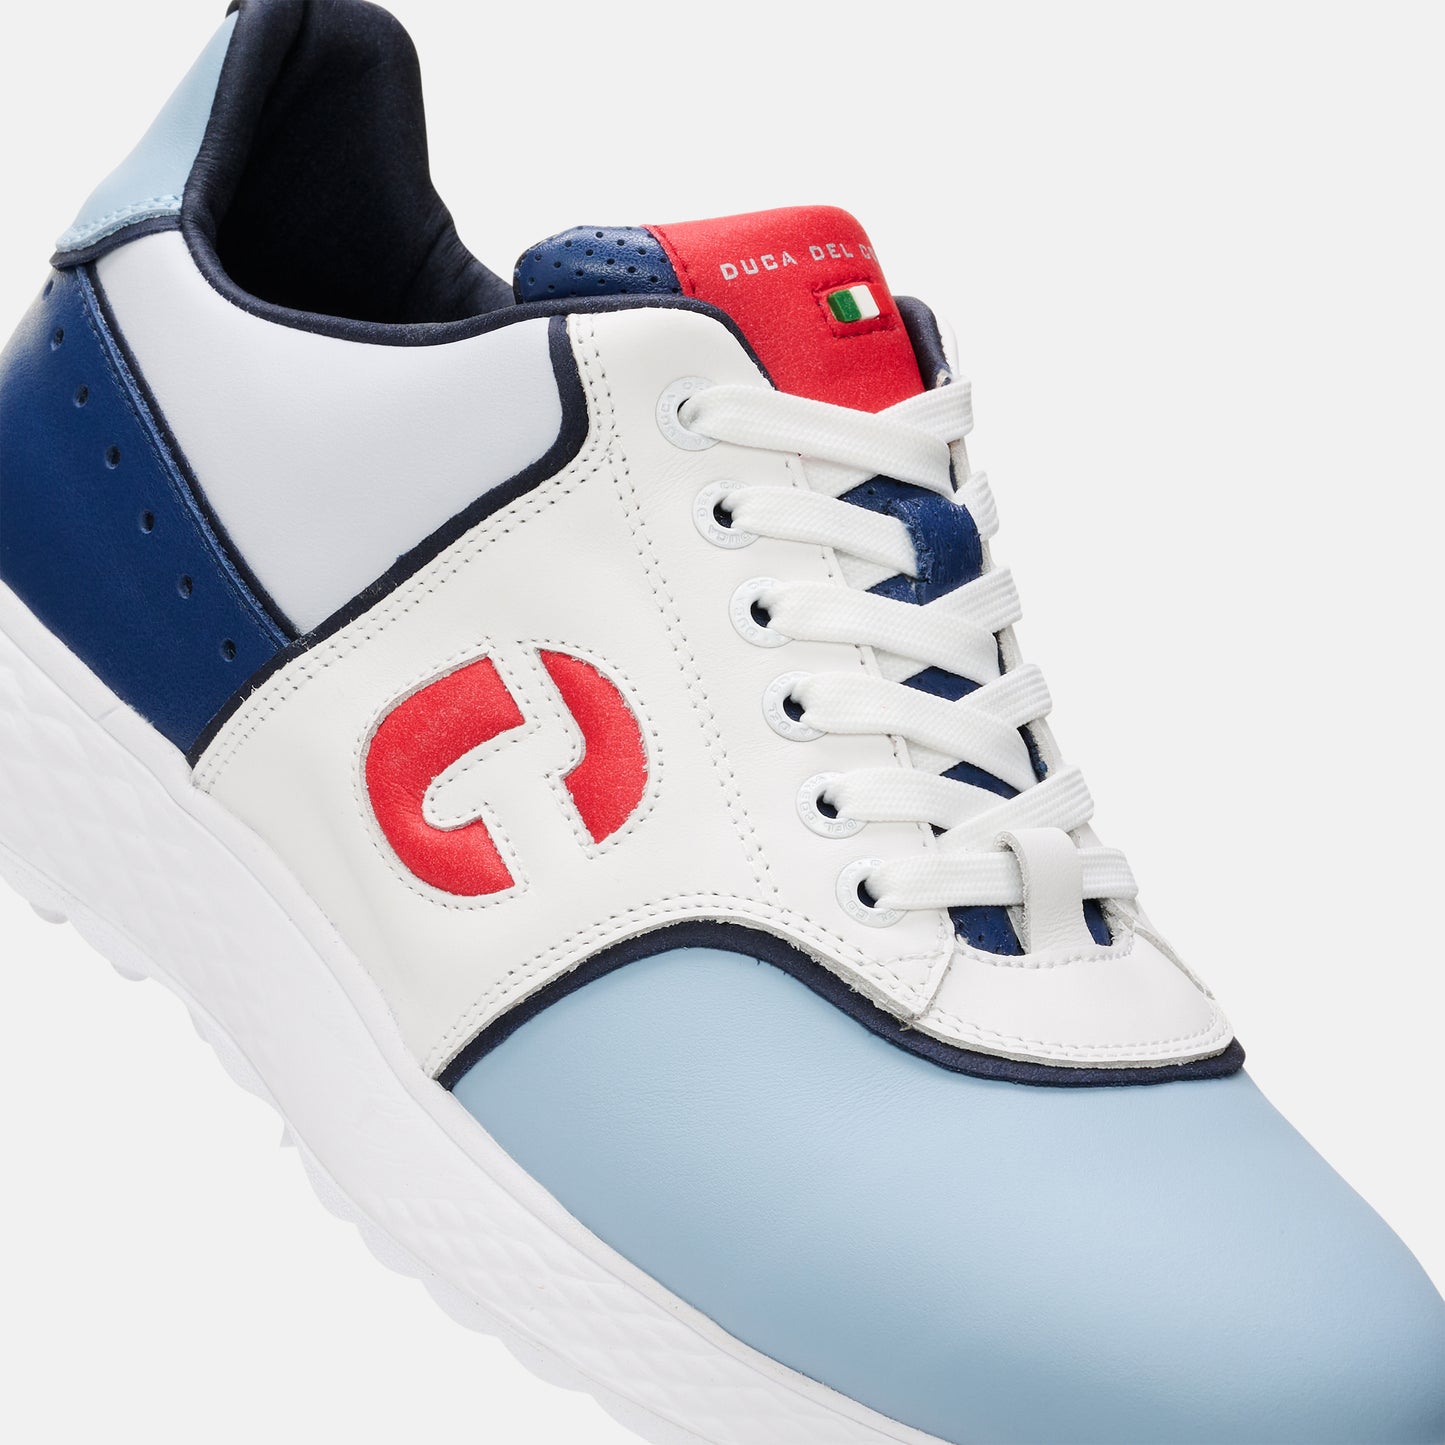 Red Golf Shoes, Blue Golf Shoes, Lightweight Men's Golf Shoes Duca del Cosma, Spikeless Golf Shoes, Waterproof Golf Shoes.